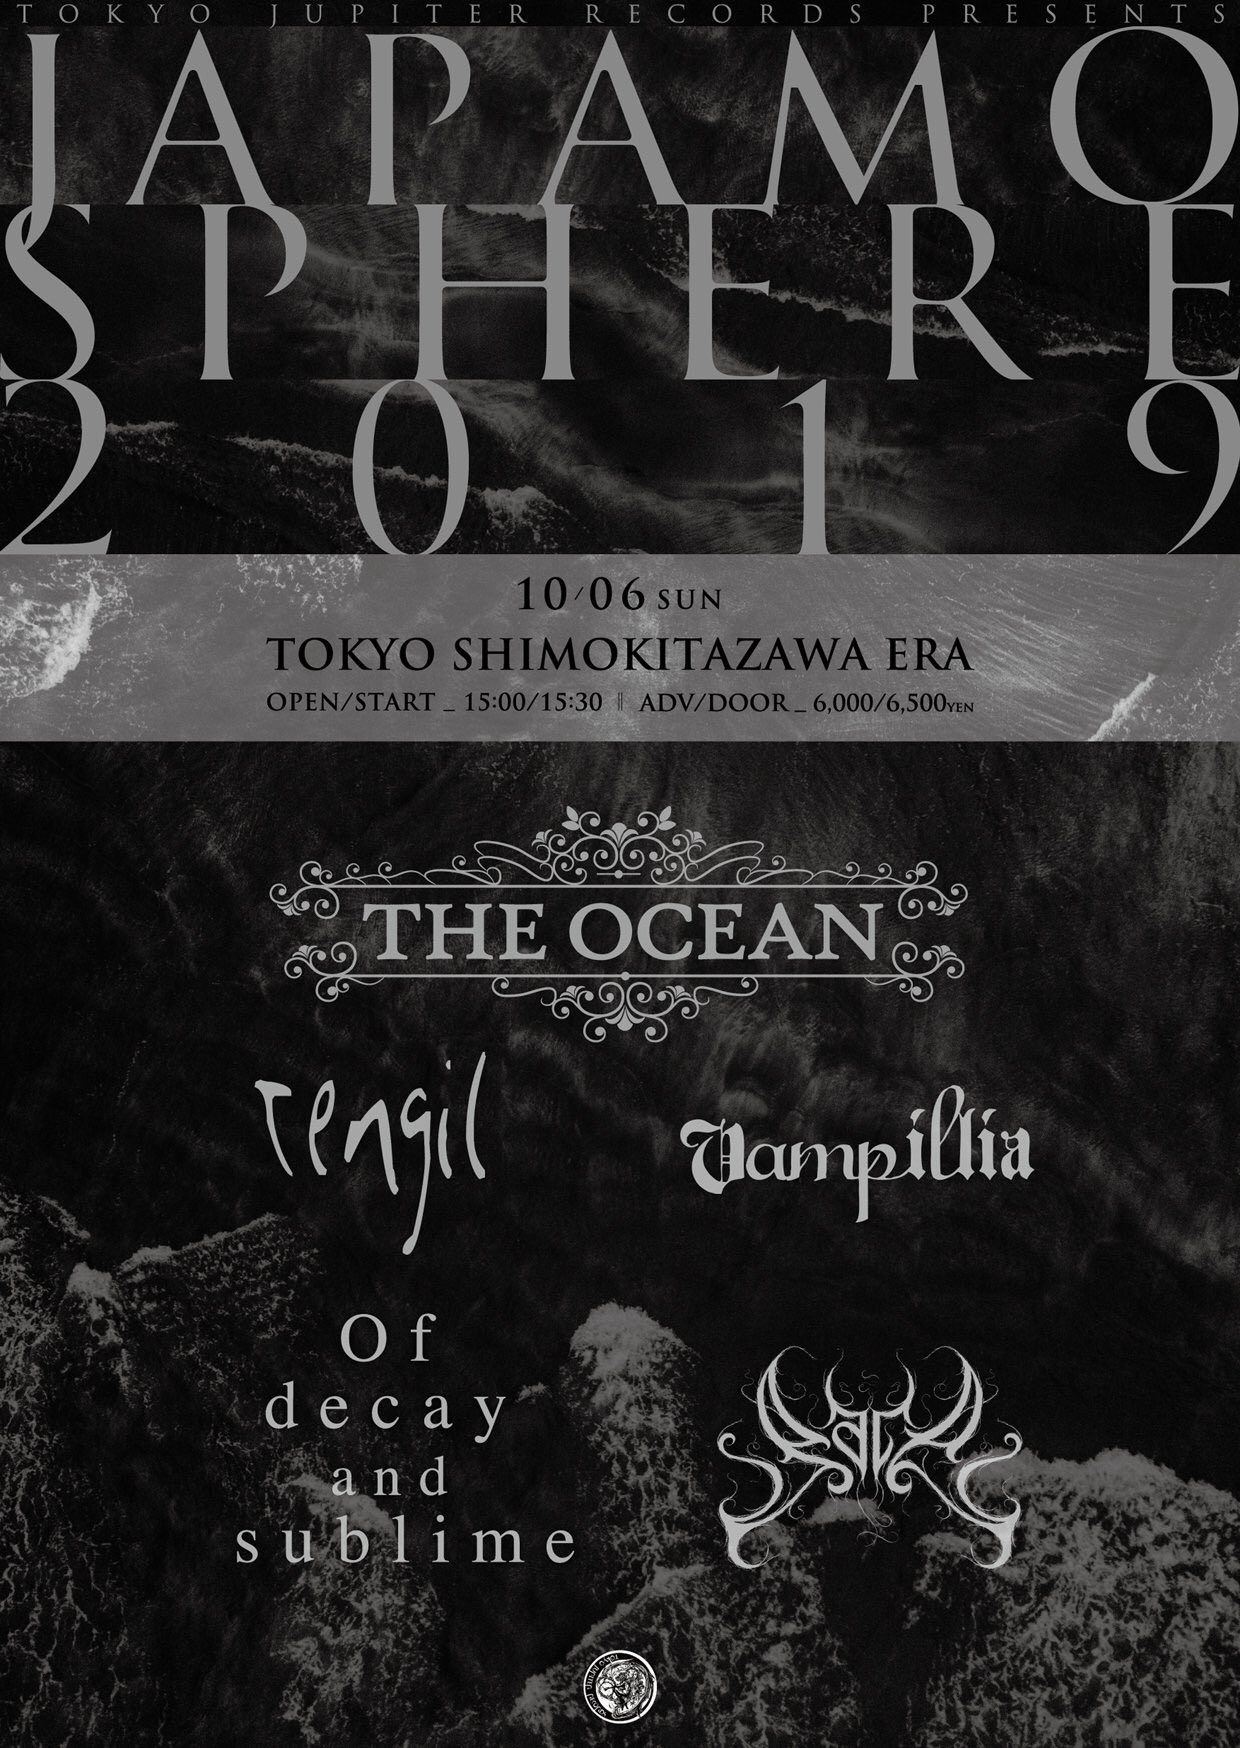 JAPAMOSPHERE 2019 by Tokyo Jupiter Records with THE OCEAN, Tengil, Vampillia, Of decay and sublime, and pale